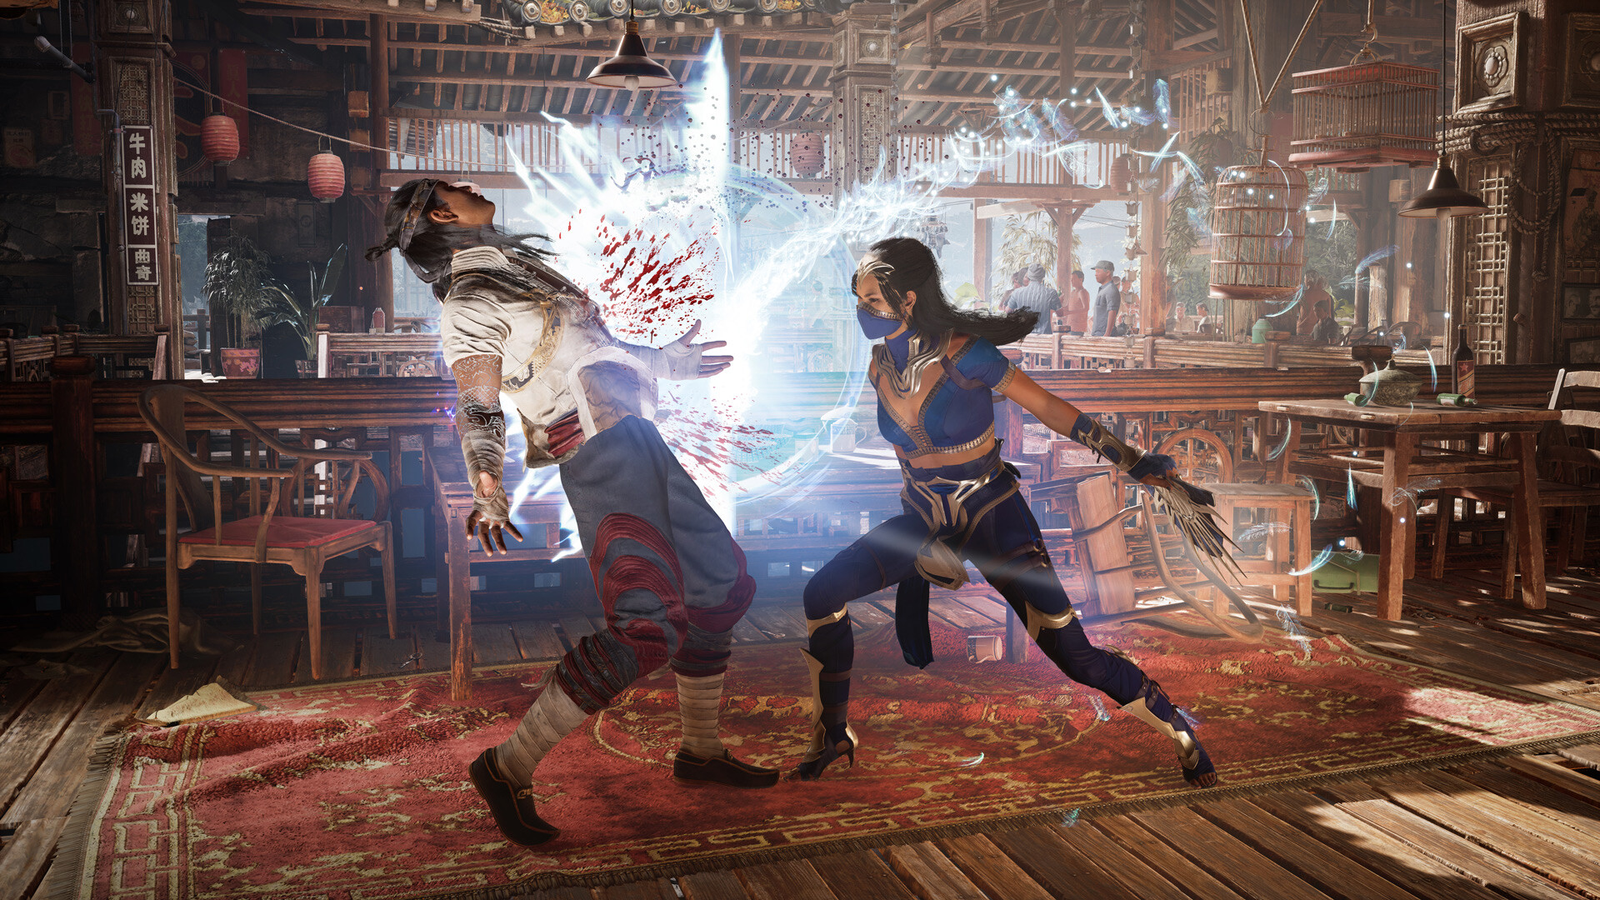 New Mortal Kombat game revealed – and it's a gruesome reboot